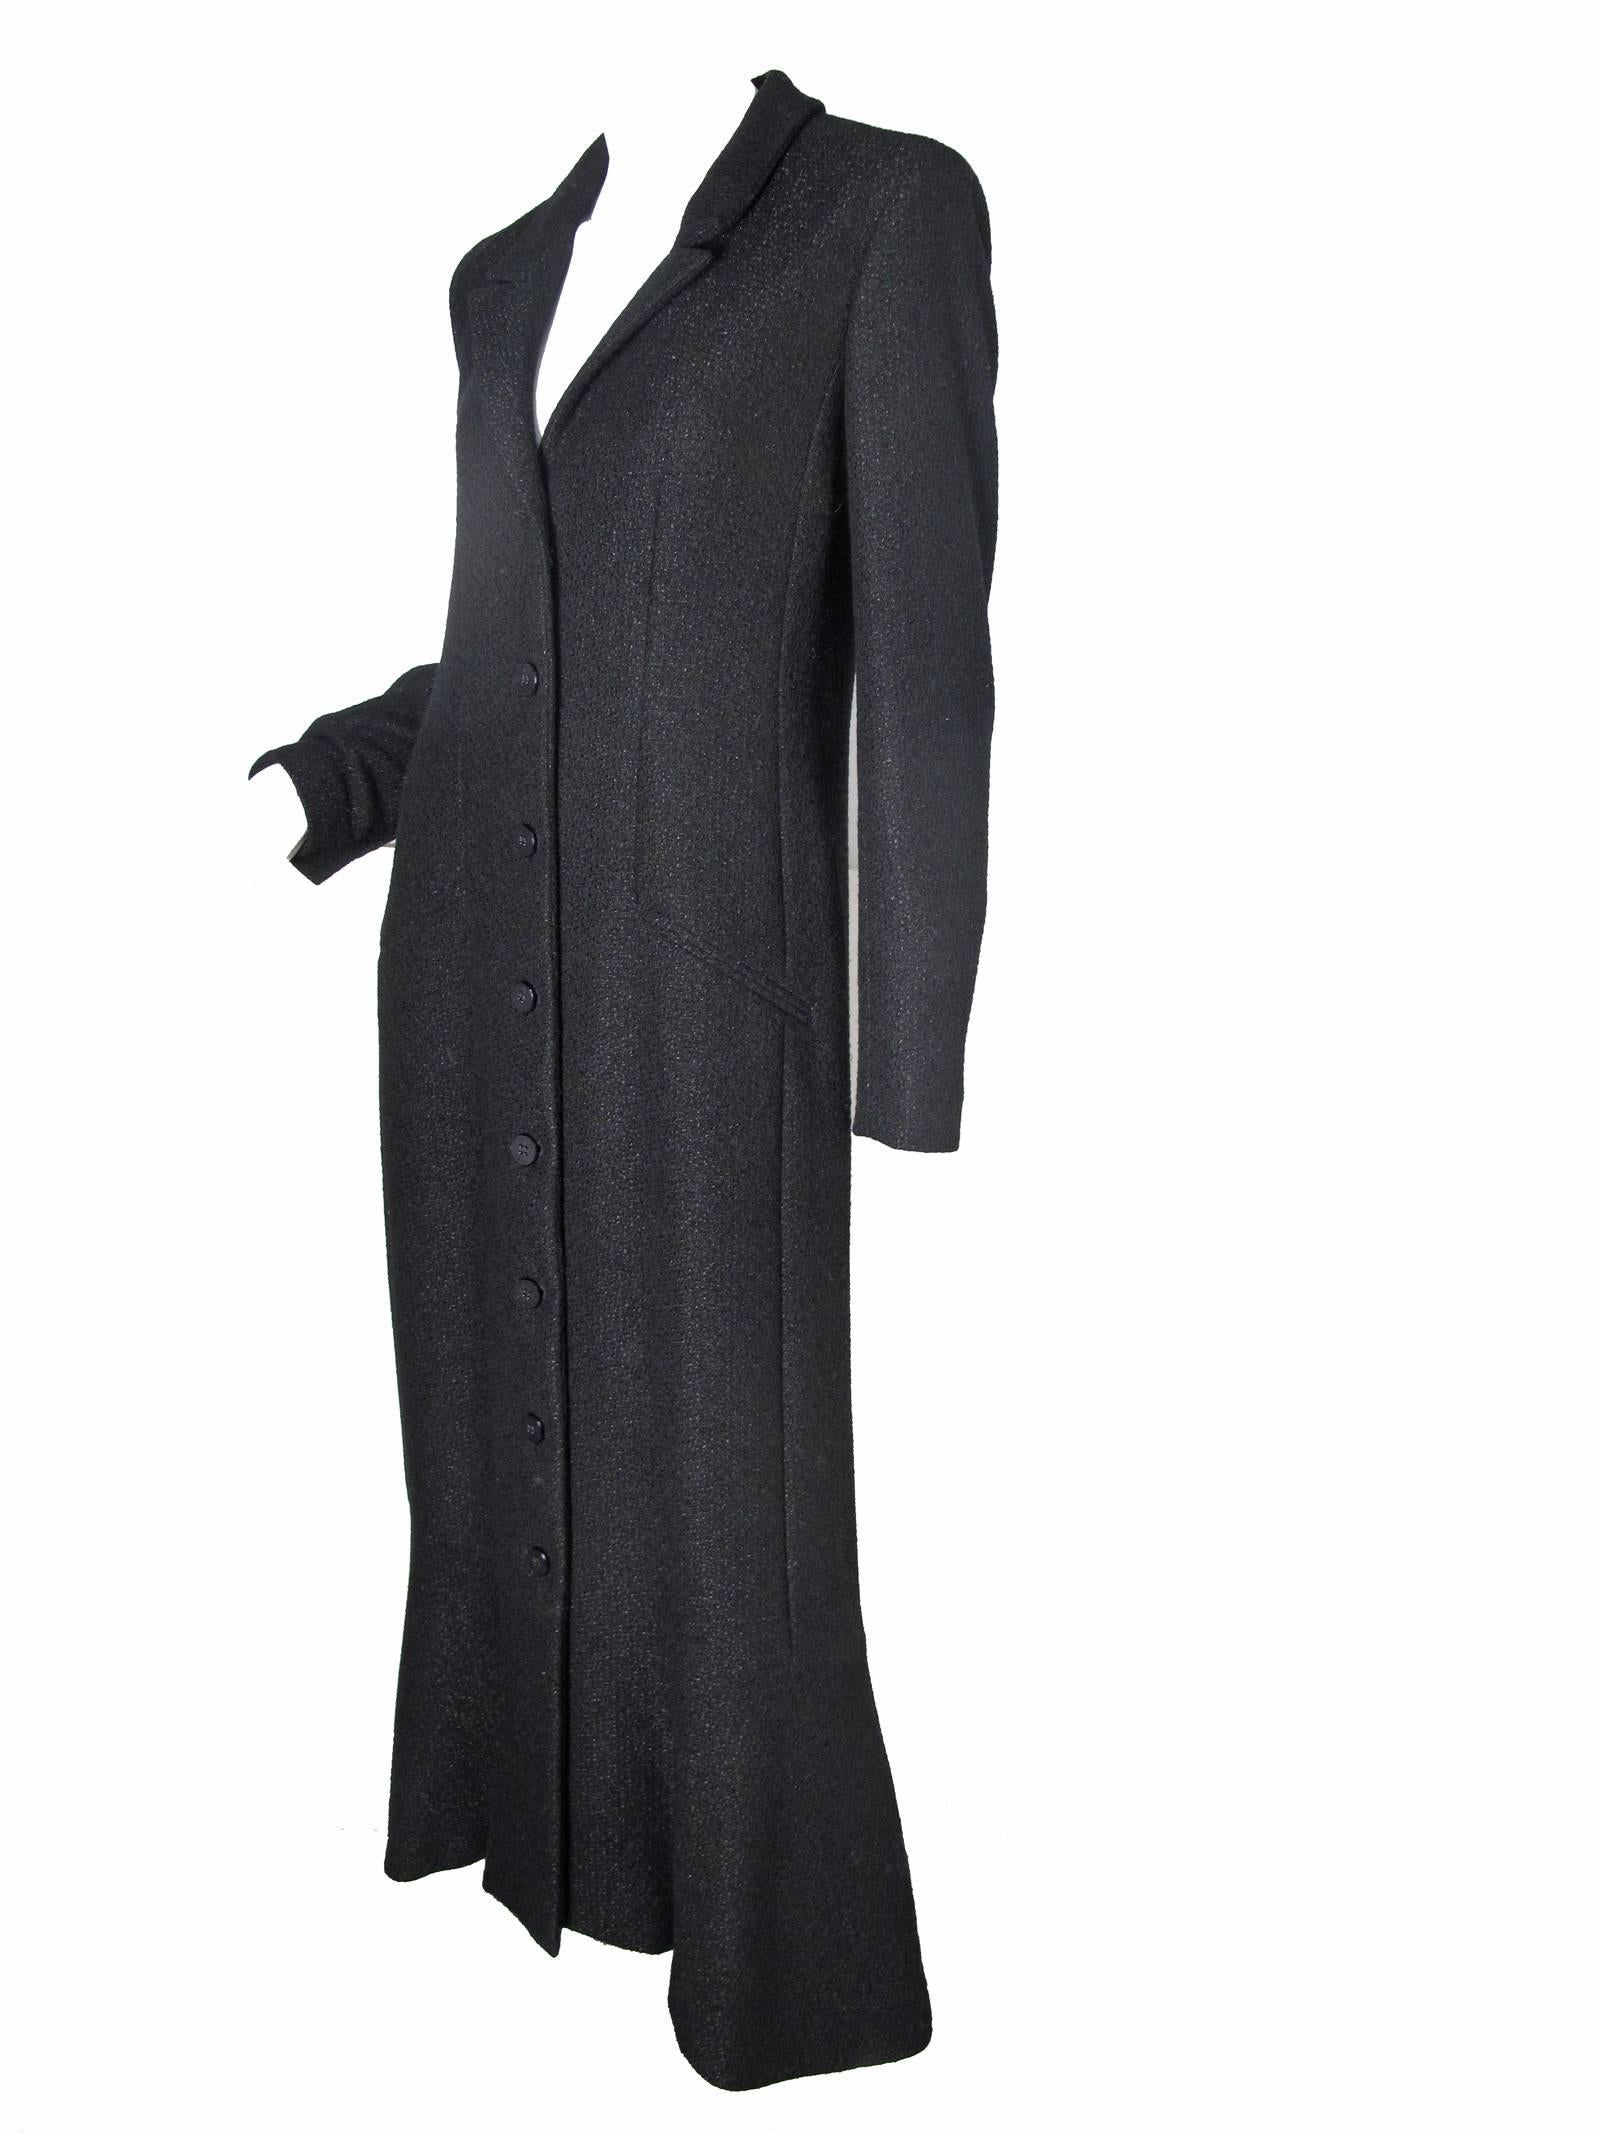 Chanel black coat dress with ruffle hem, buttons down front.  Two front pockets. Condition: Excellent, comes with extra fabric swatch and two extra buttons.  Wool, nylon fabric. Size 40

38